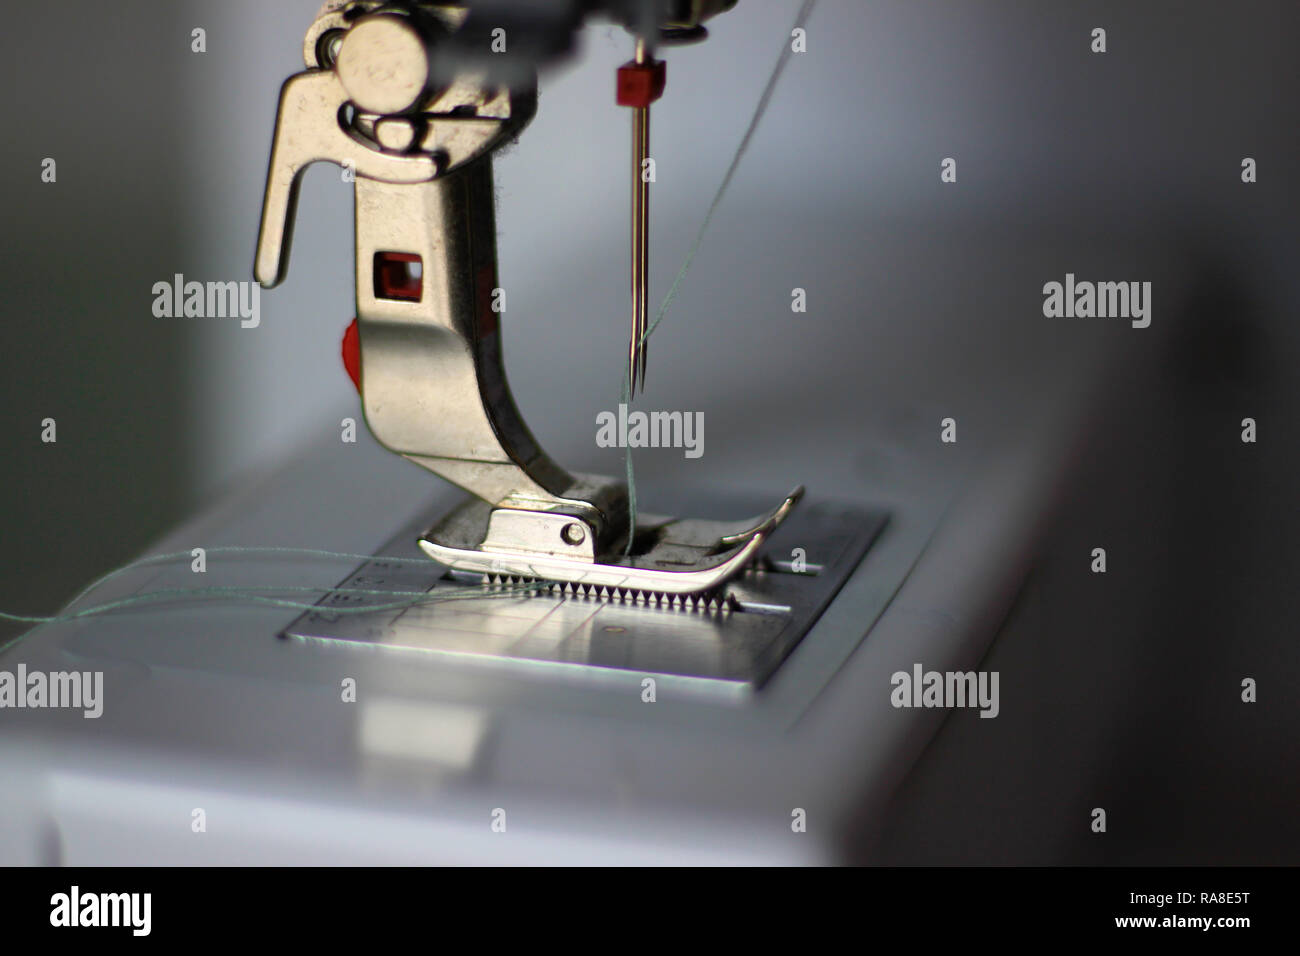 Close-up photo of a sewing machine. Pressing foot, double needle, light blue thread. Selectively focused. Stock Photo